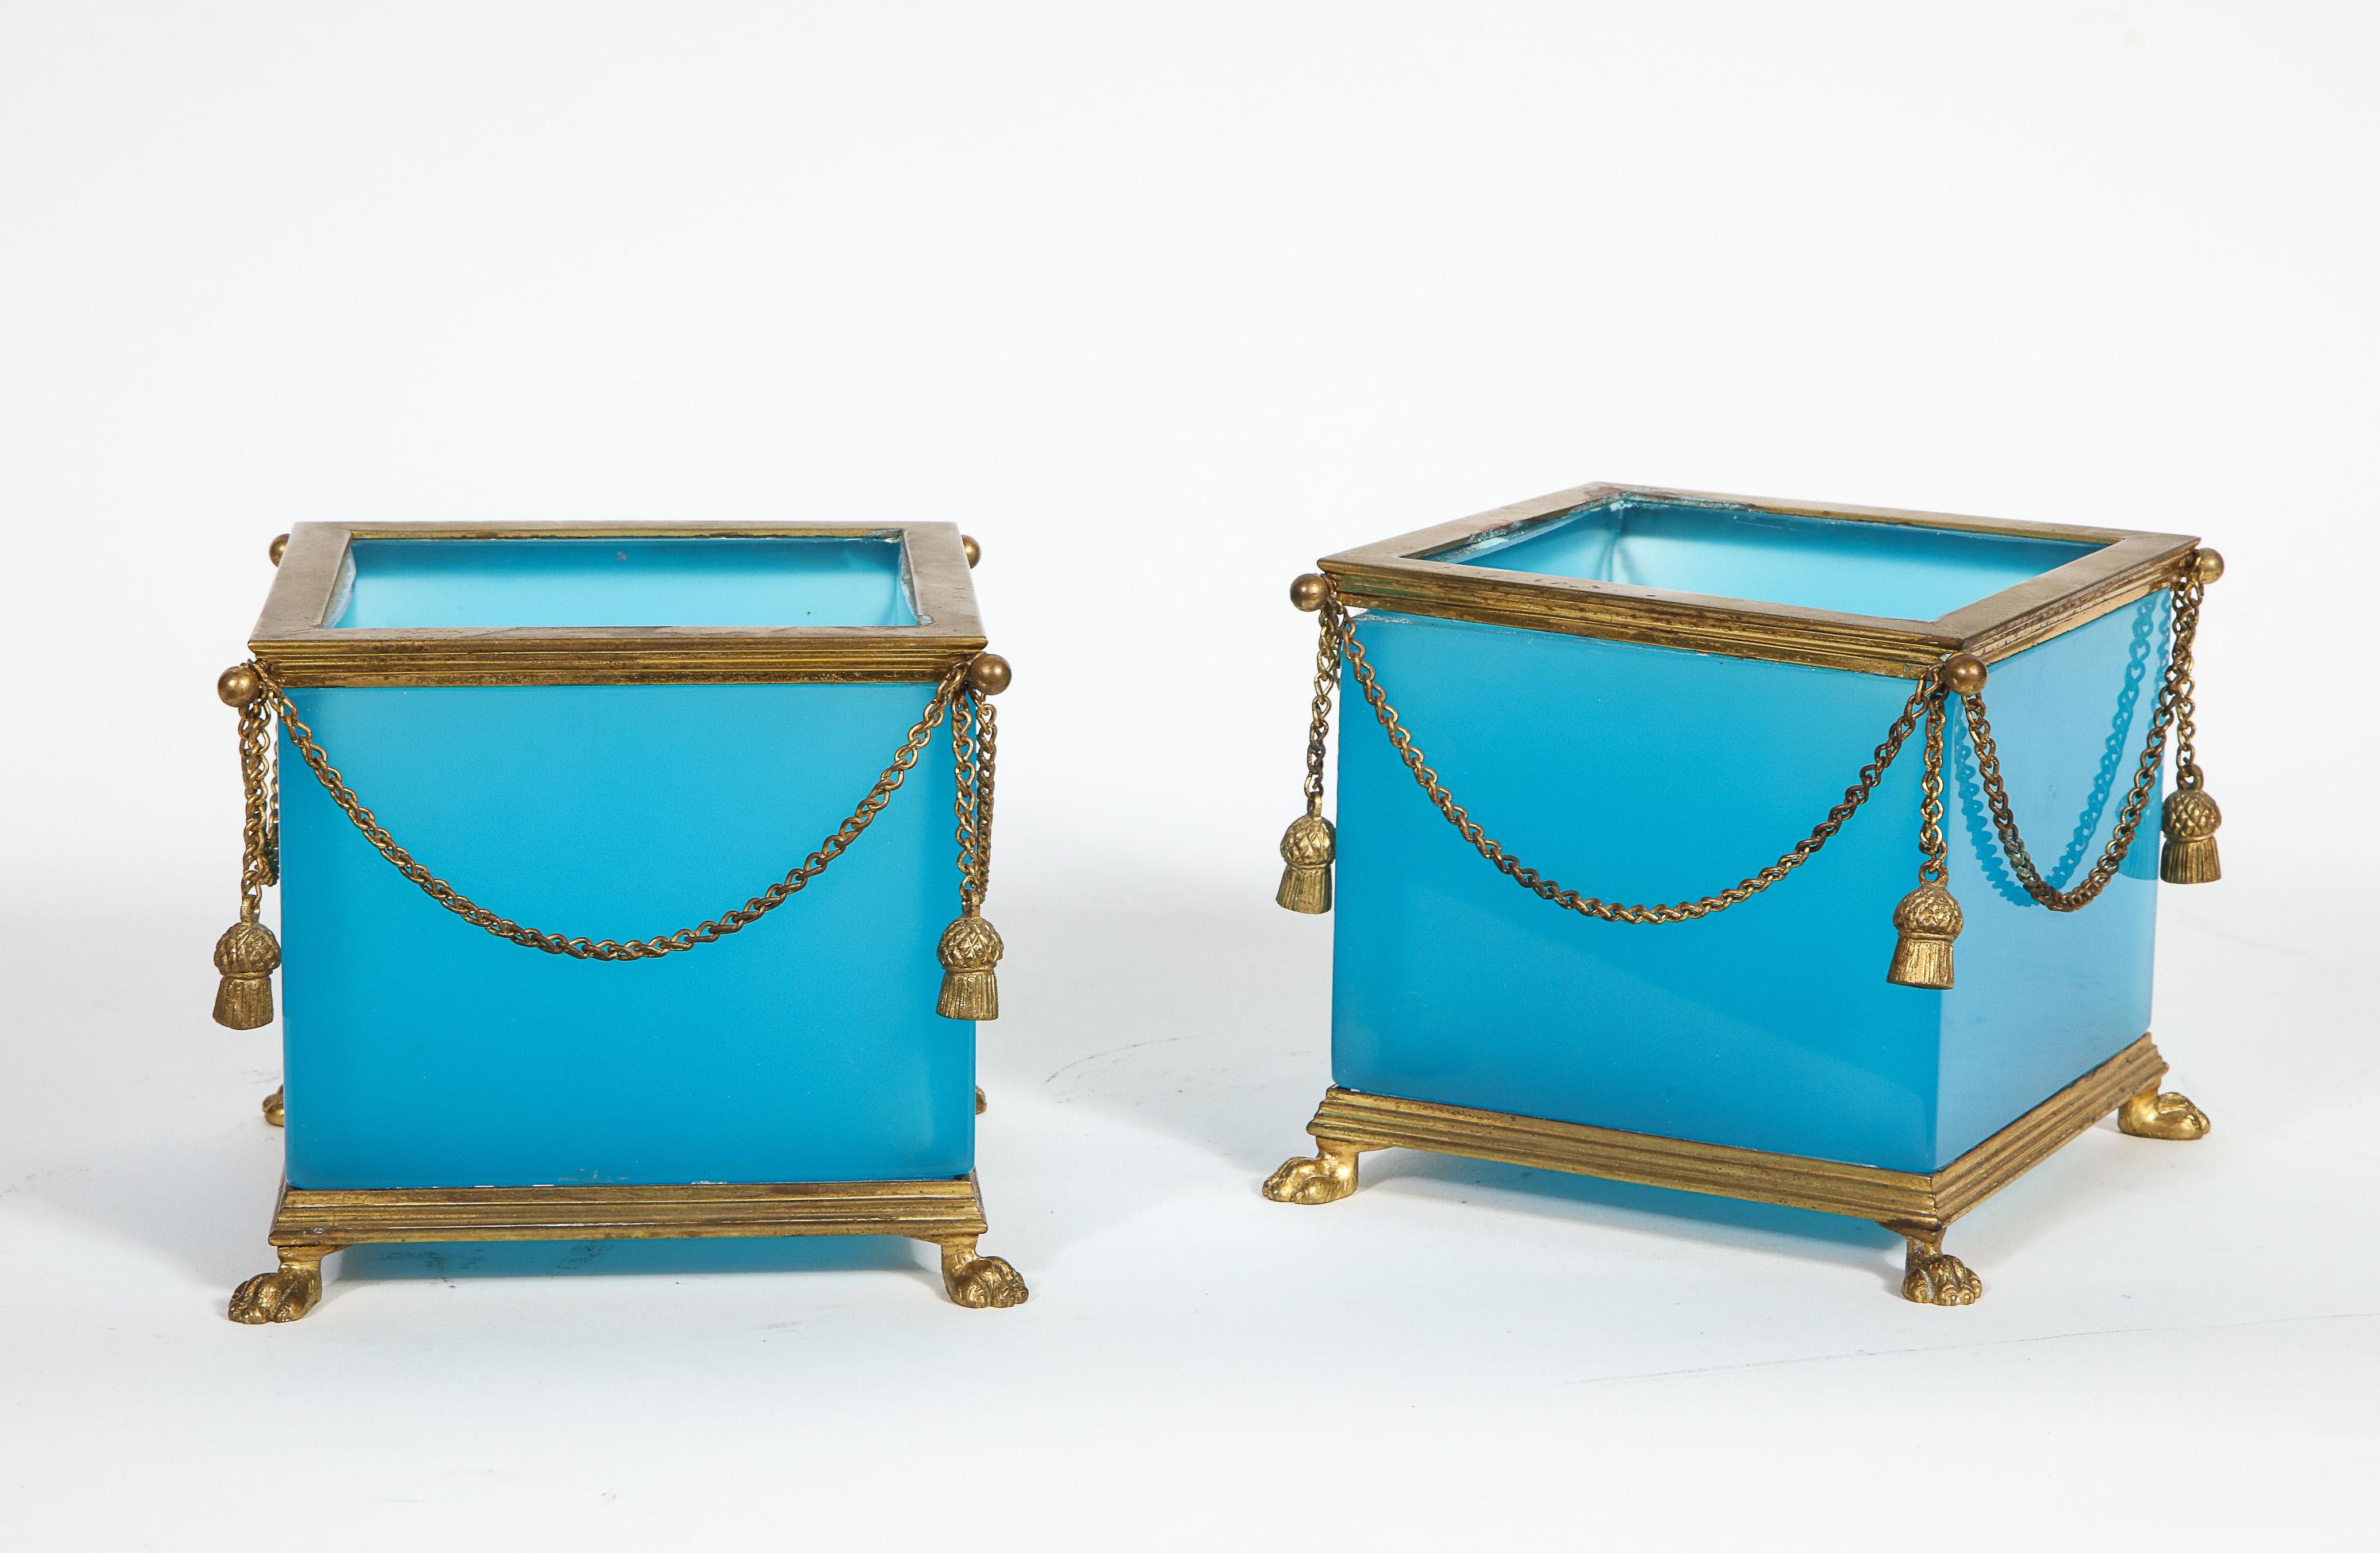 Exquisite and very elegant pair of French ormolu-mounted turquoise blue opaline glass jardinières cache pots, attributed to Baccarat, paris, circa 1870.

Each of square form, the stepped rim with suspending chains and pendant tassels, raised on